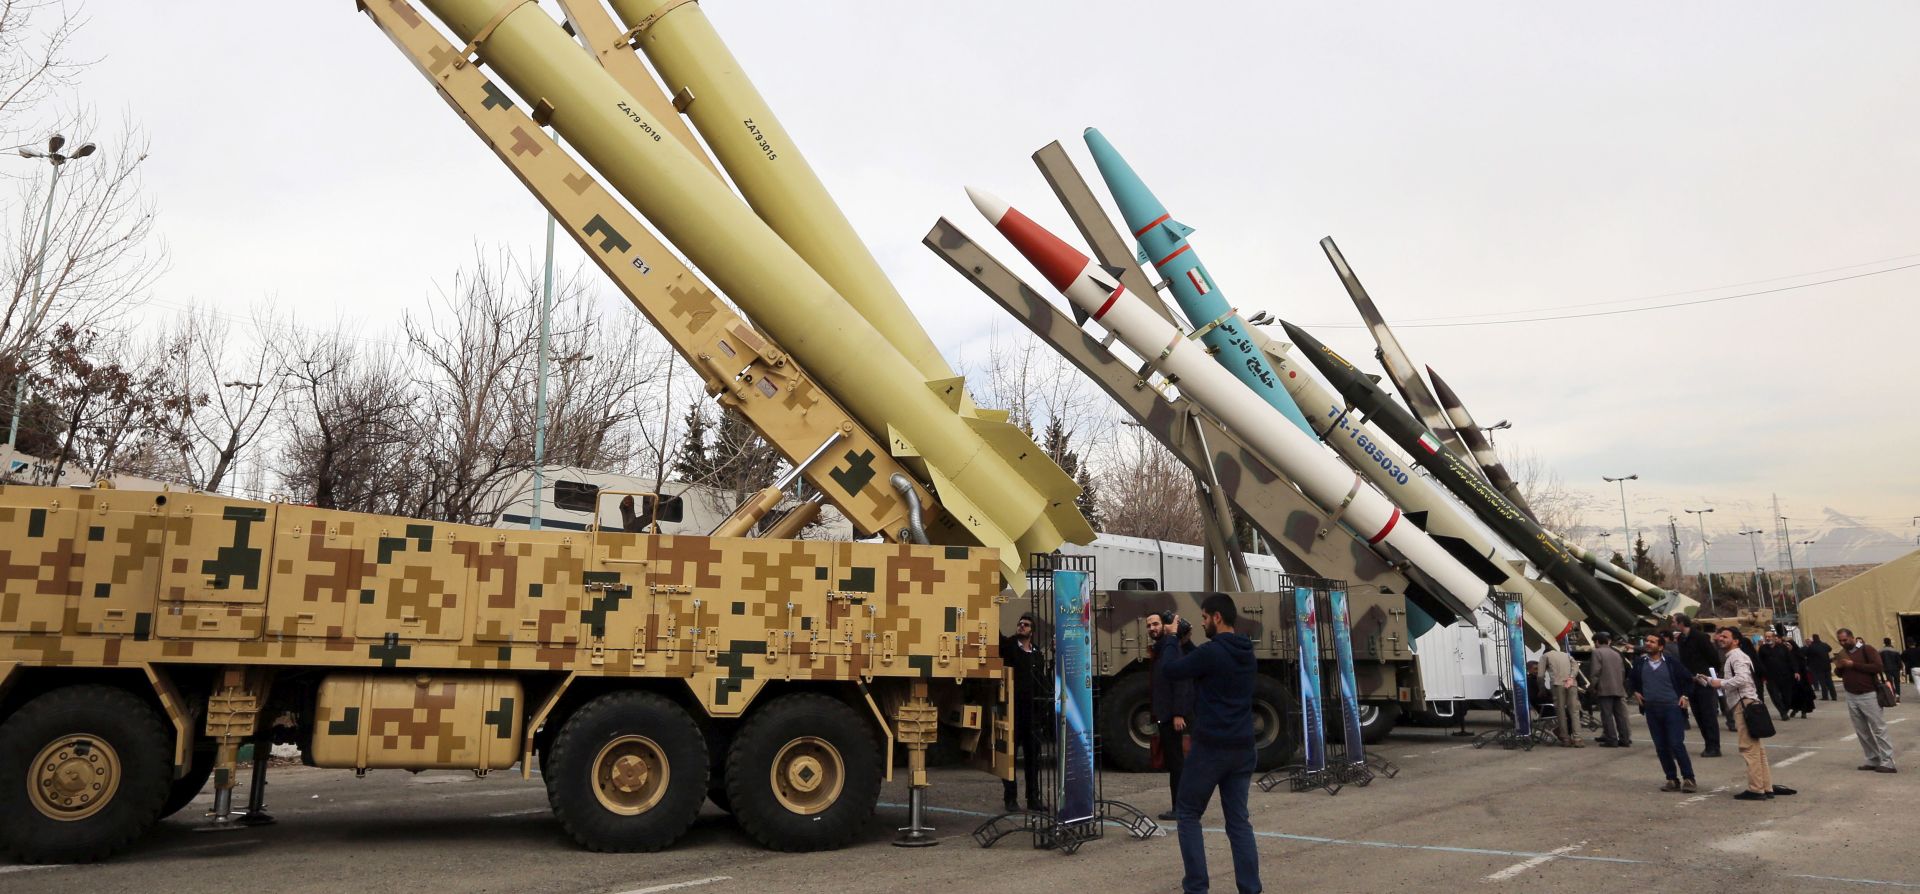 epa07339702 Iranians visit a weaponry and military equipment exhibition in Tehran, Iran, 02 February, 2019, organised on the occasion of the 40th anniversary of the Iranian revolution. Media reported that that Iran inaugurated a new cruise missile 'Hoveizeh' which is said to have a range of more than 1,350 kilometers. Iran will celebrate its 40th revolution anniversary on 11 February 2019.  EPA/STR